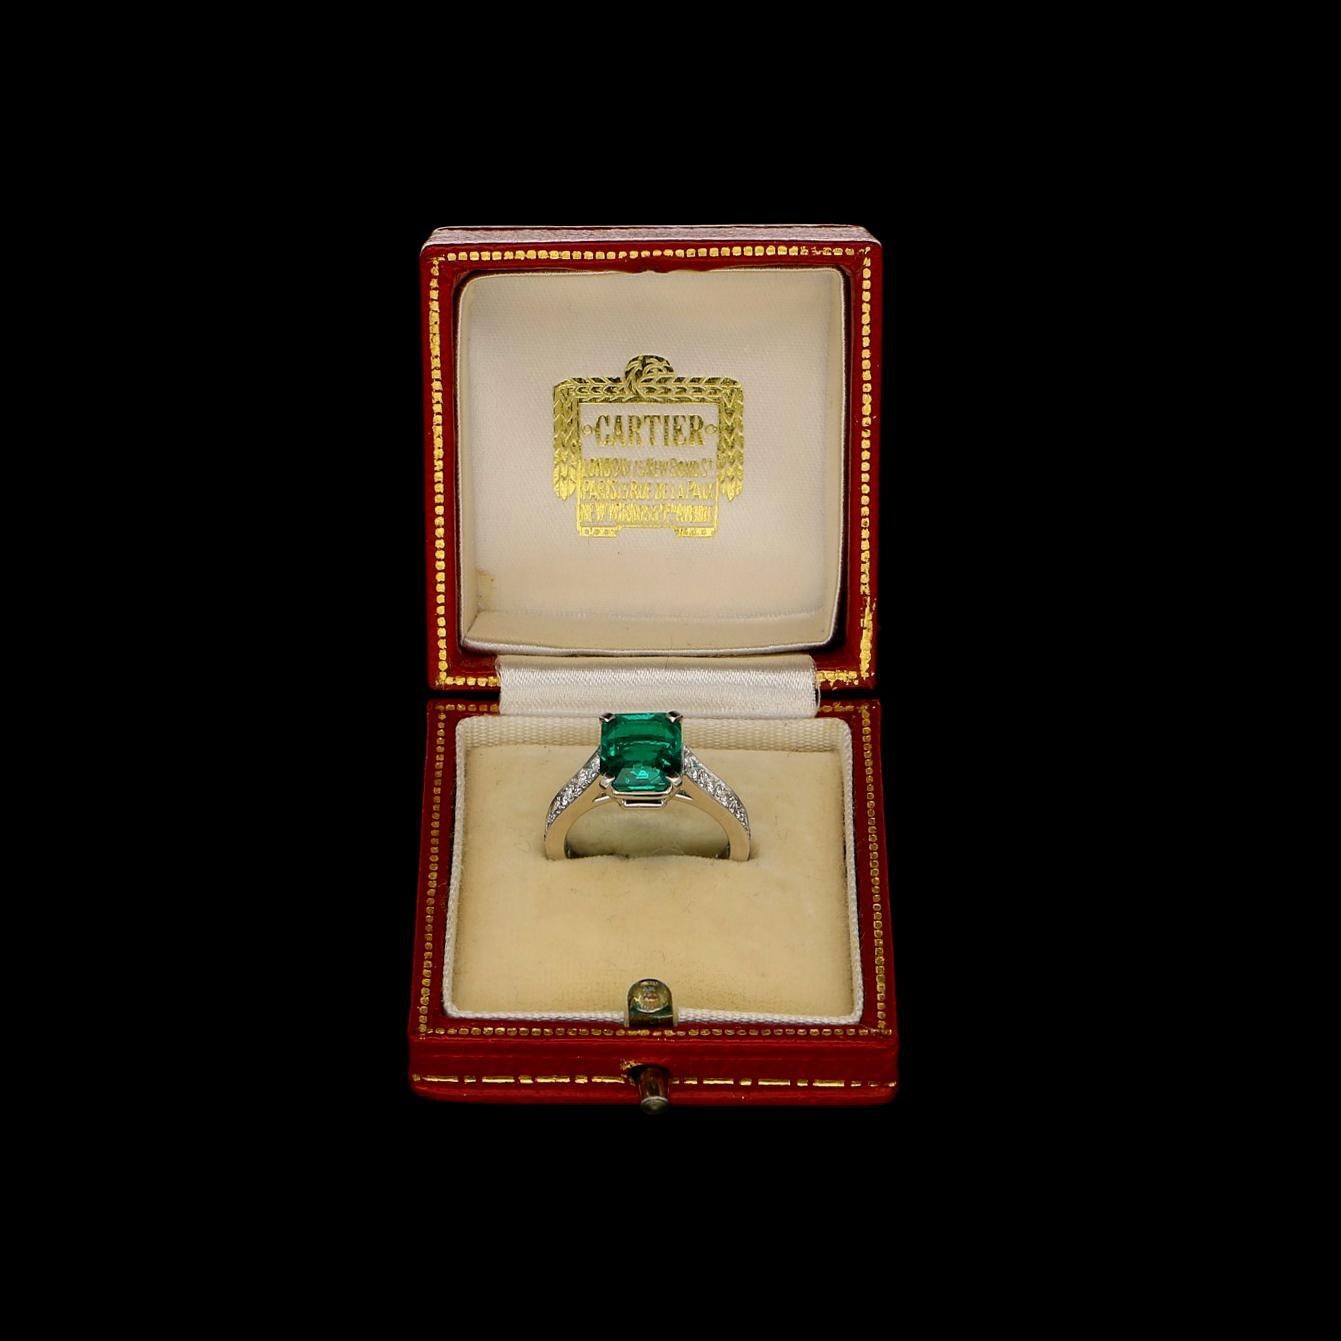 Emerald Cut Beautiful 2.59ct Colombian Emerald & Diamond Platinum Solitaire Ring by Cartier